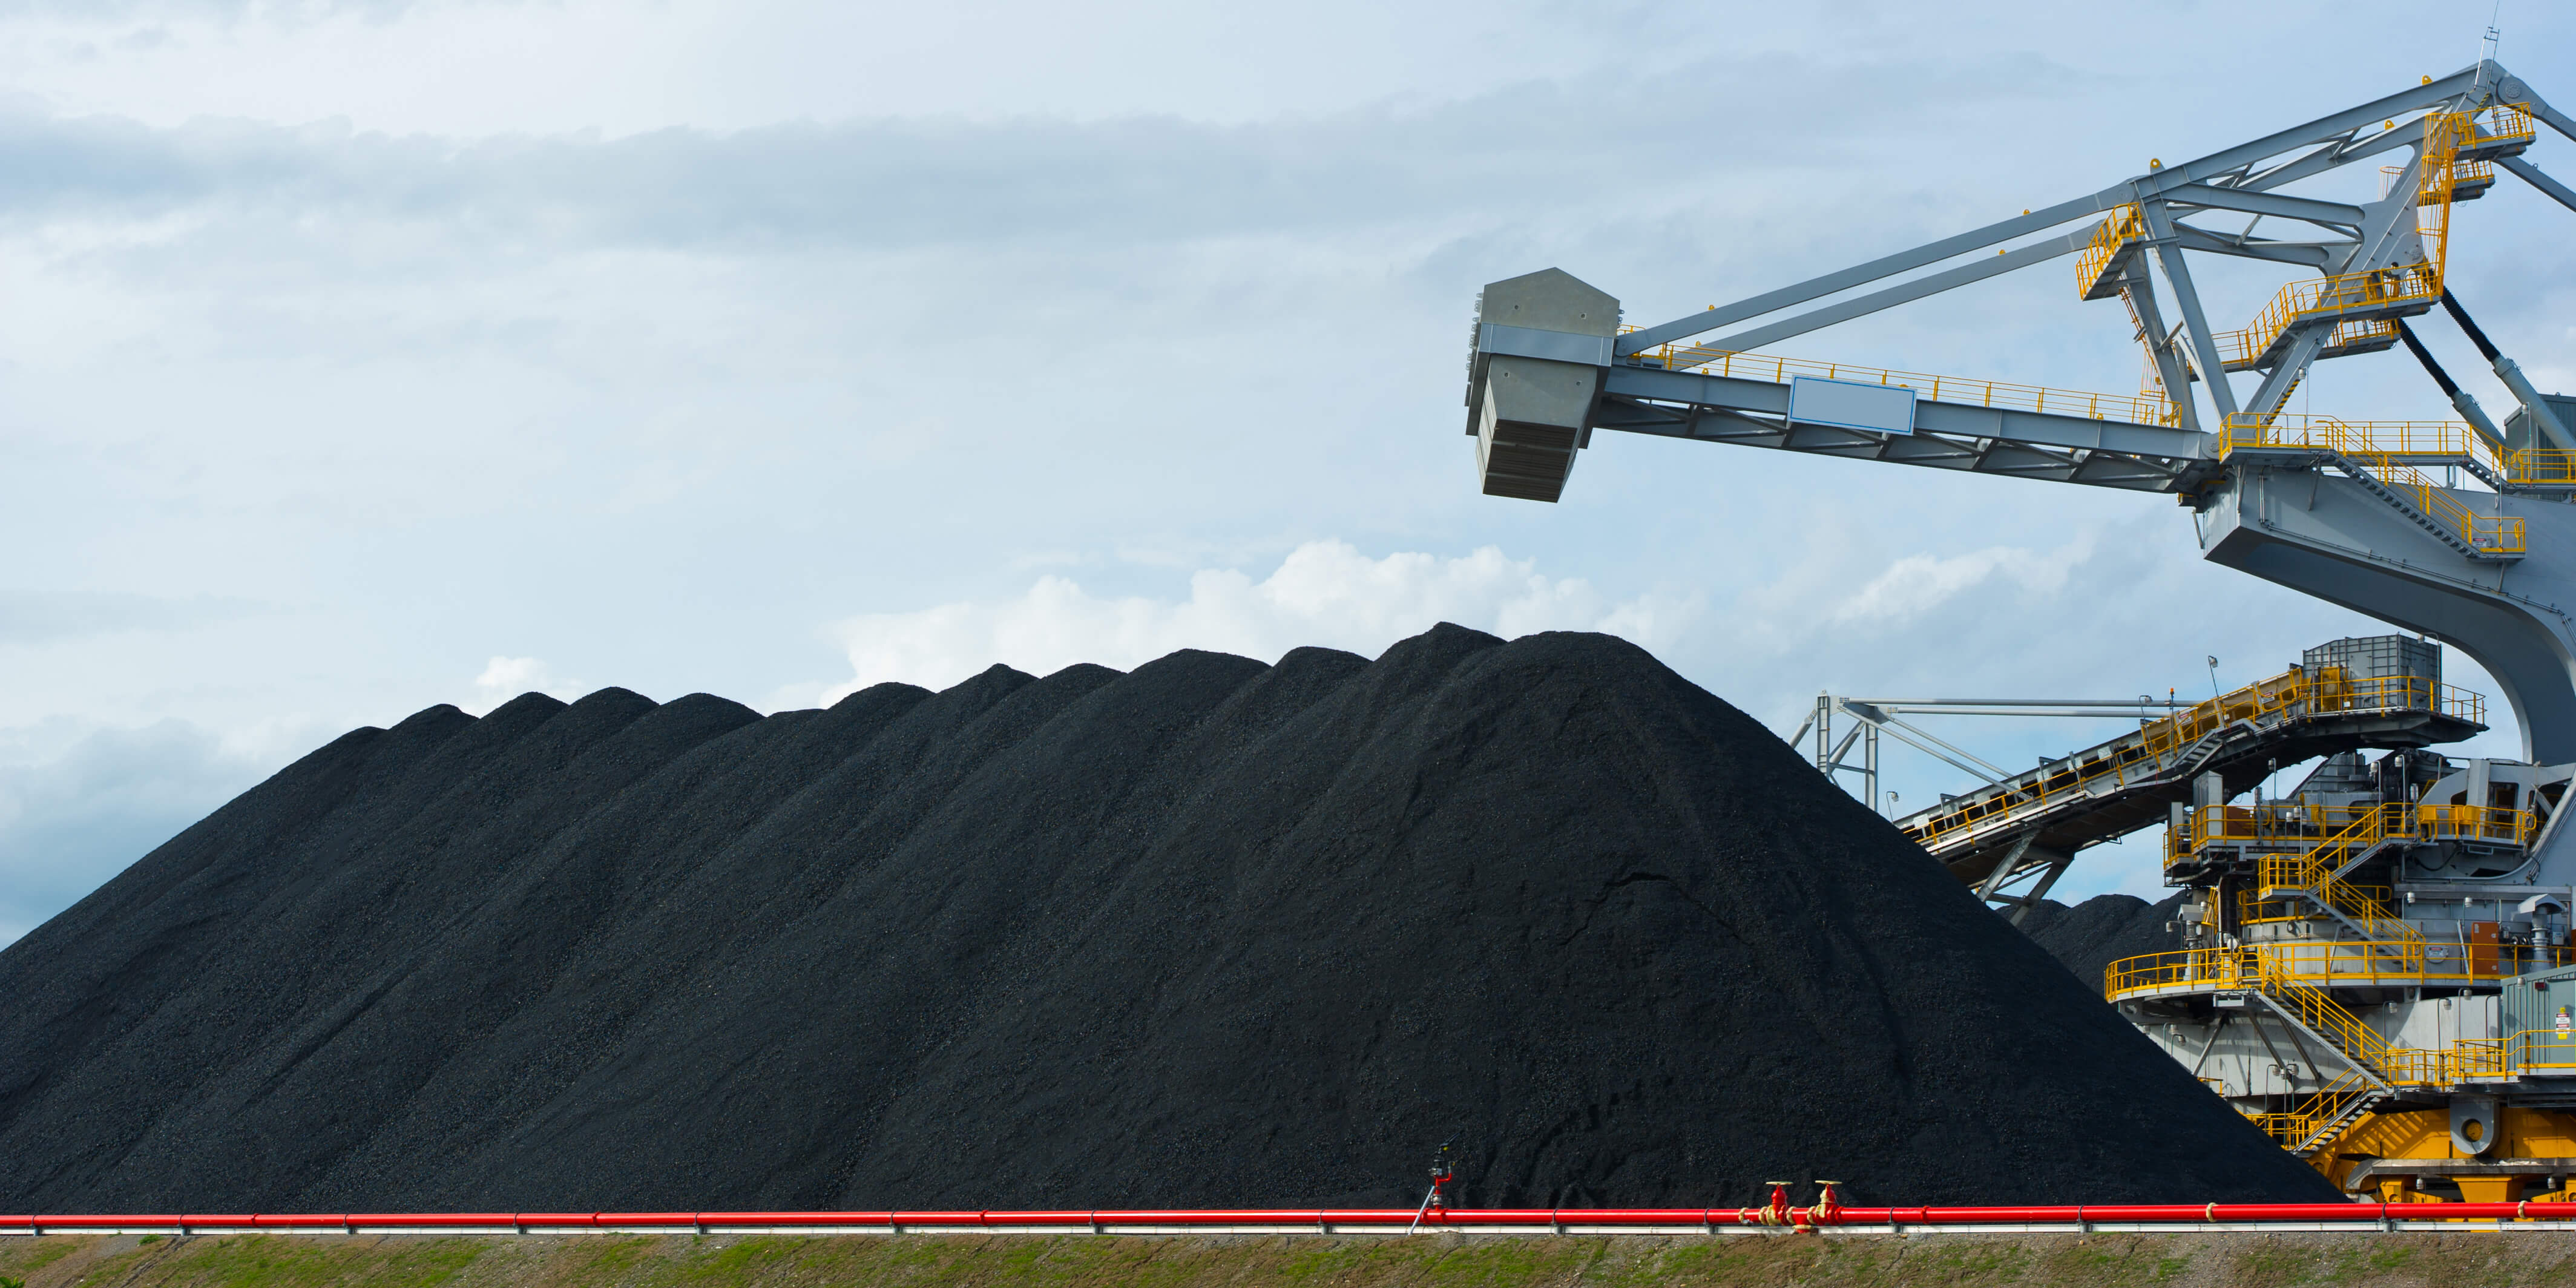 A large stack of coal with part of a reclaimer on the right hand side